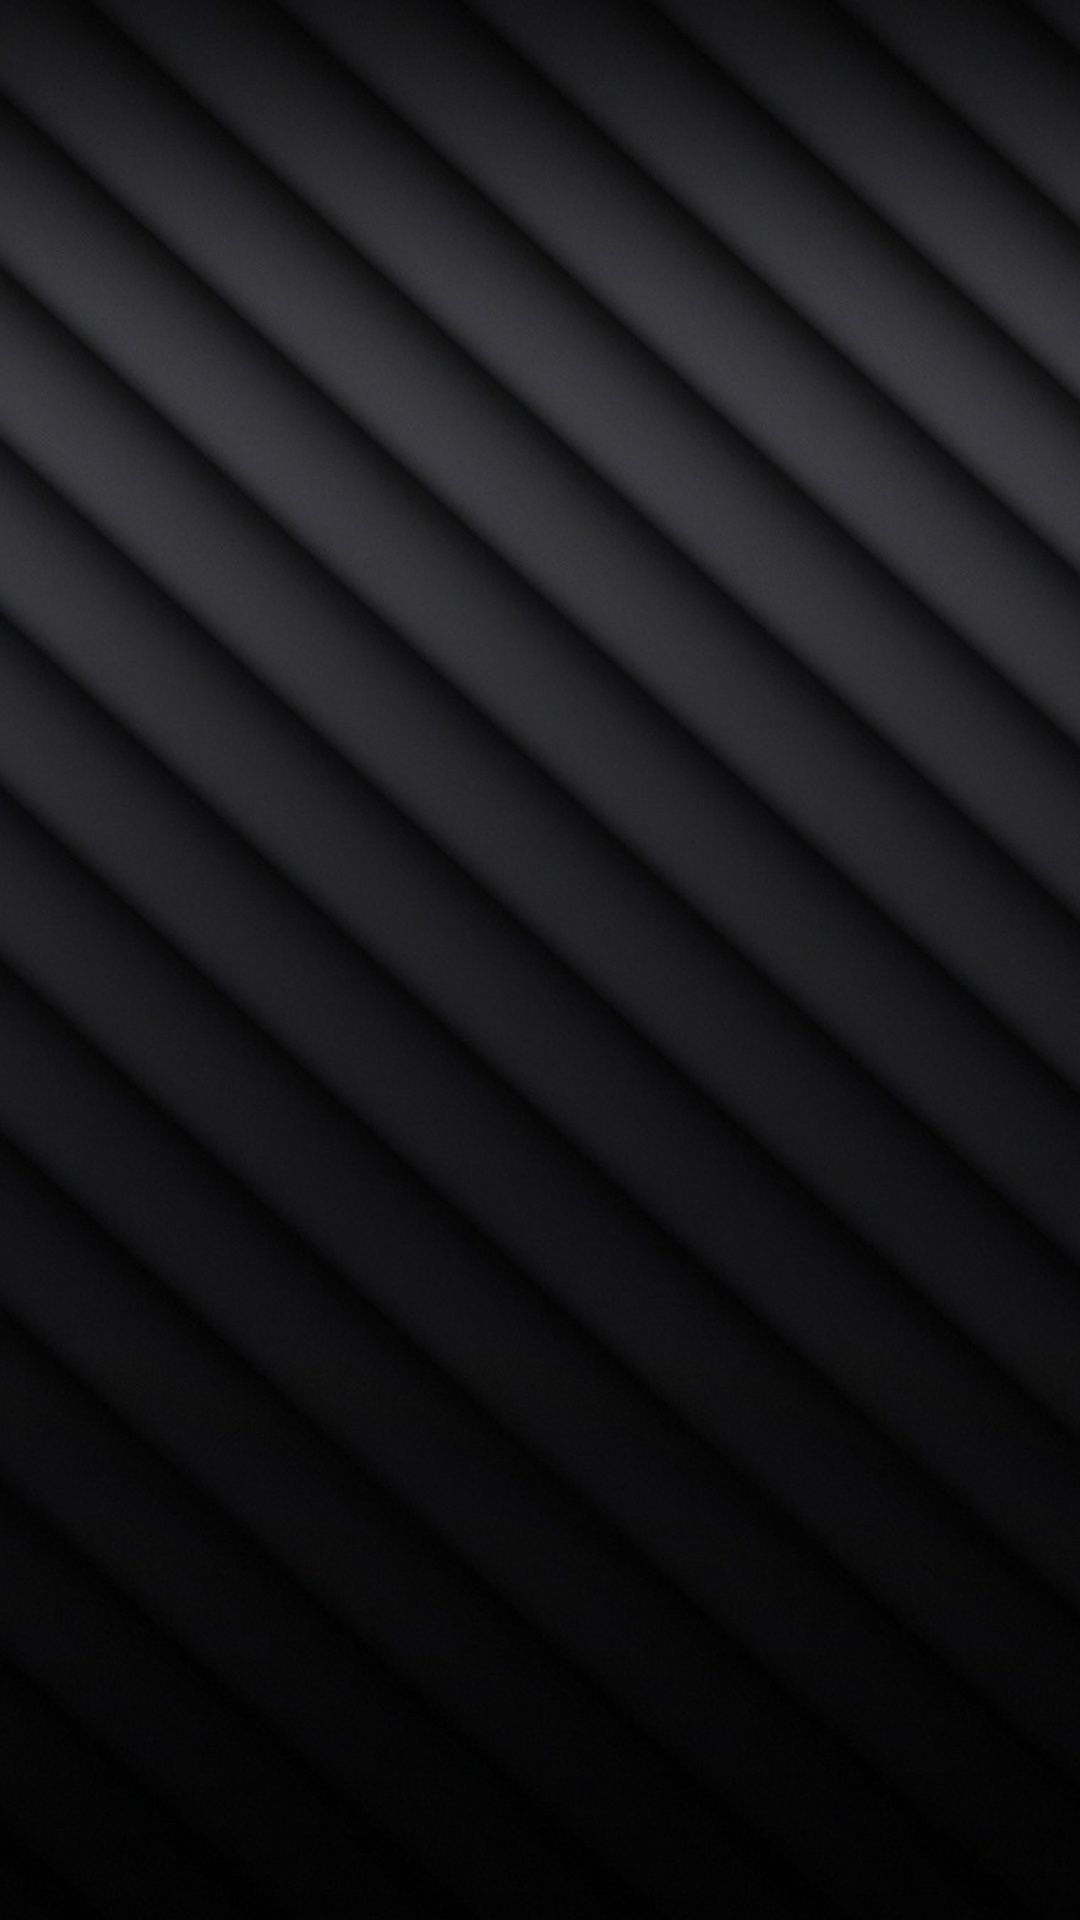 Solid Black Wallpaper Android